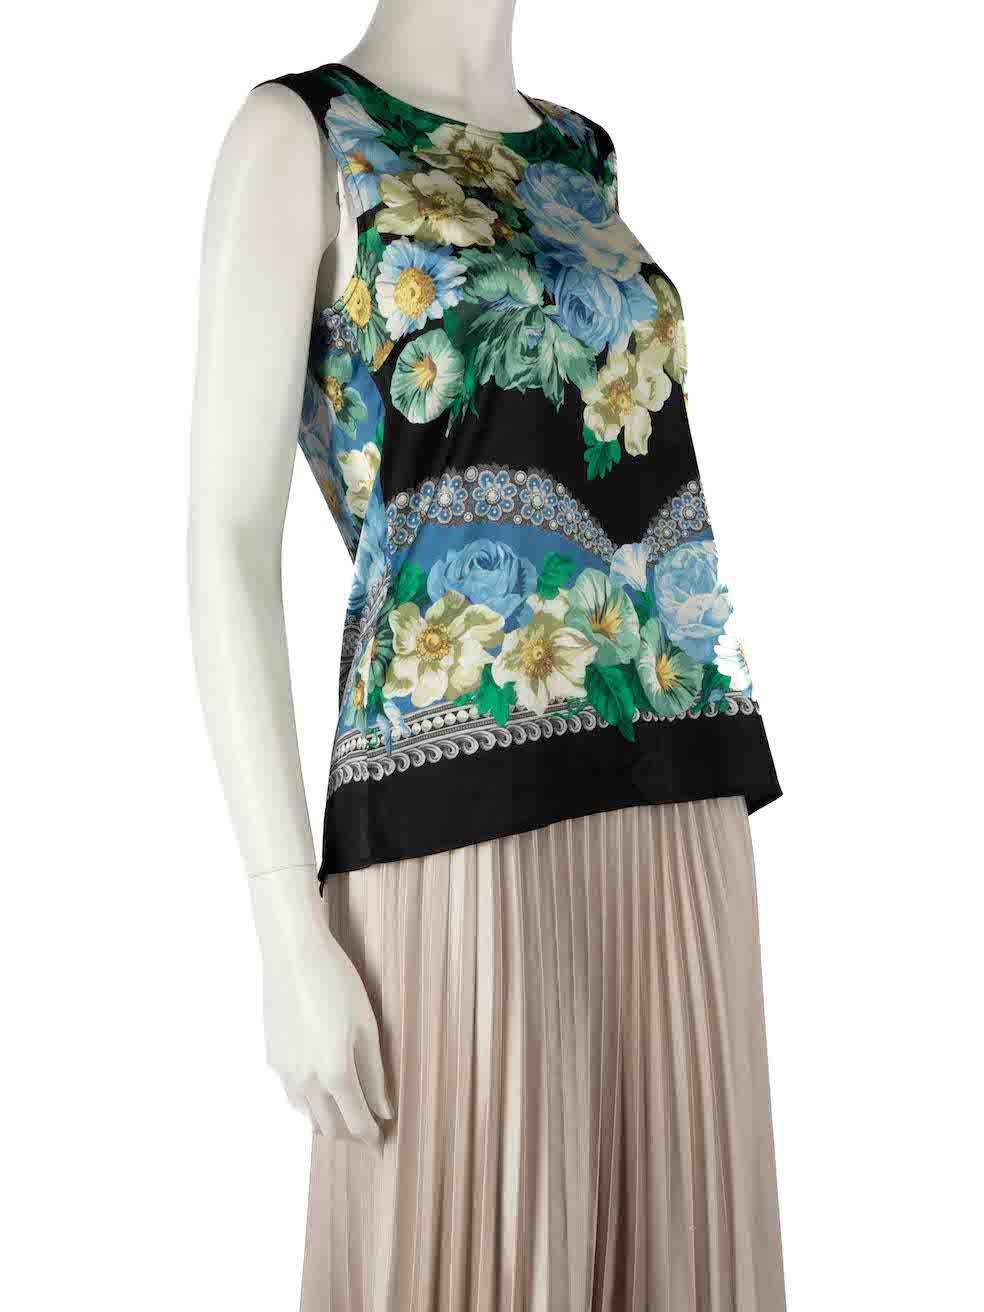 CONDITION is Never worn, with tags. No visible wear to top is evident on this new Dolce & Gabbana designer resale item.
 
 
 
 Details
 
 
 Multicolour
 
 Silk
 
 Sleeveless top
 
 Floral printed
 
 Round neckline
 
 Back button up closure
 
 
 
 
